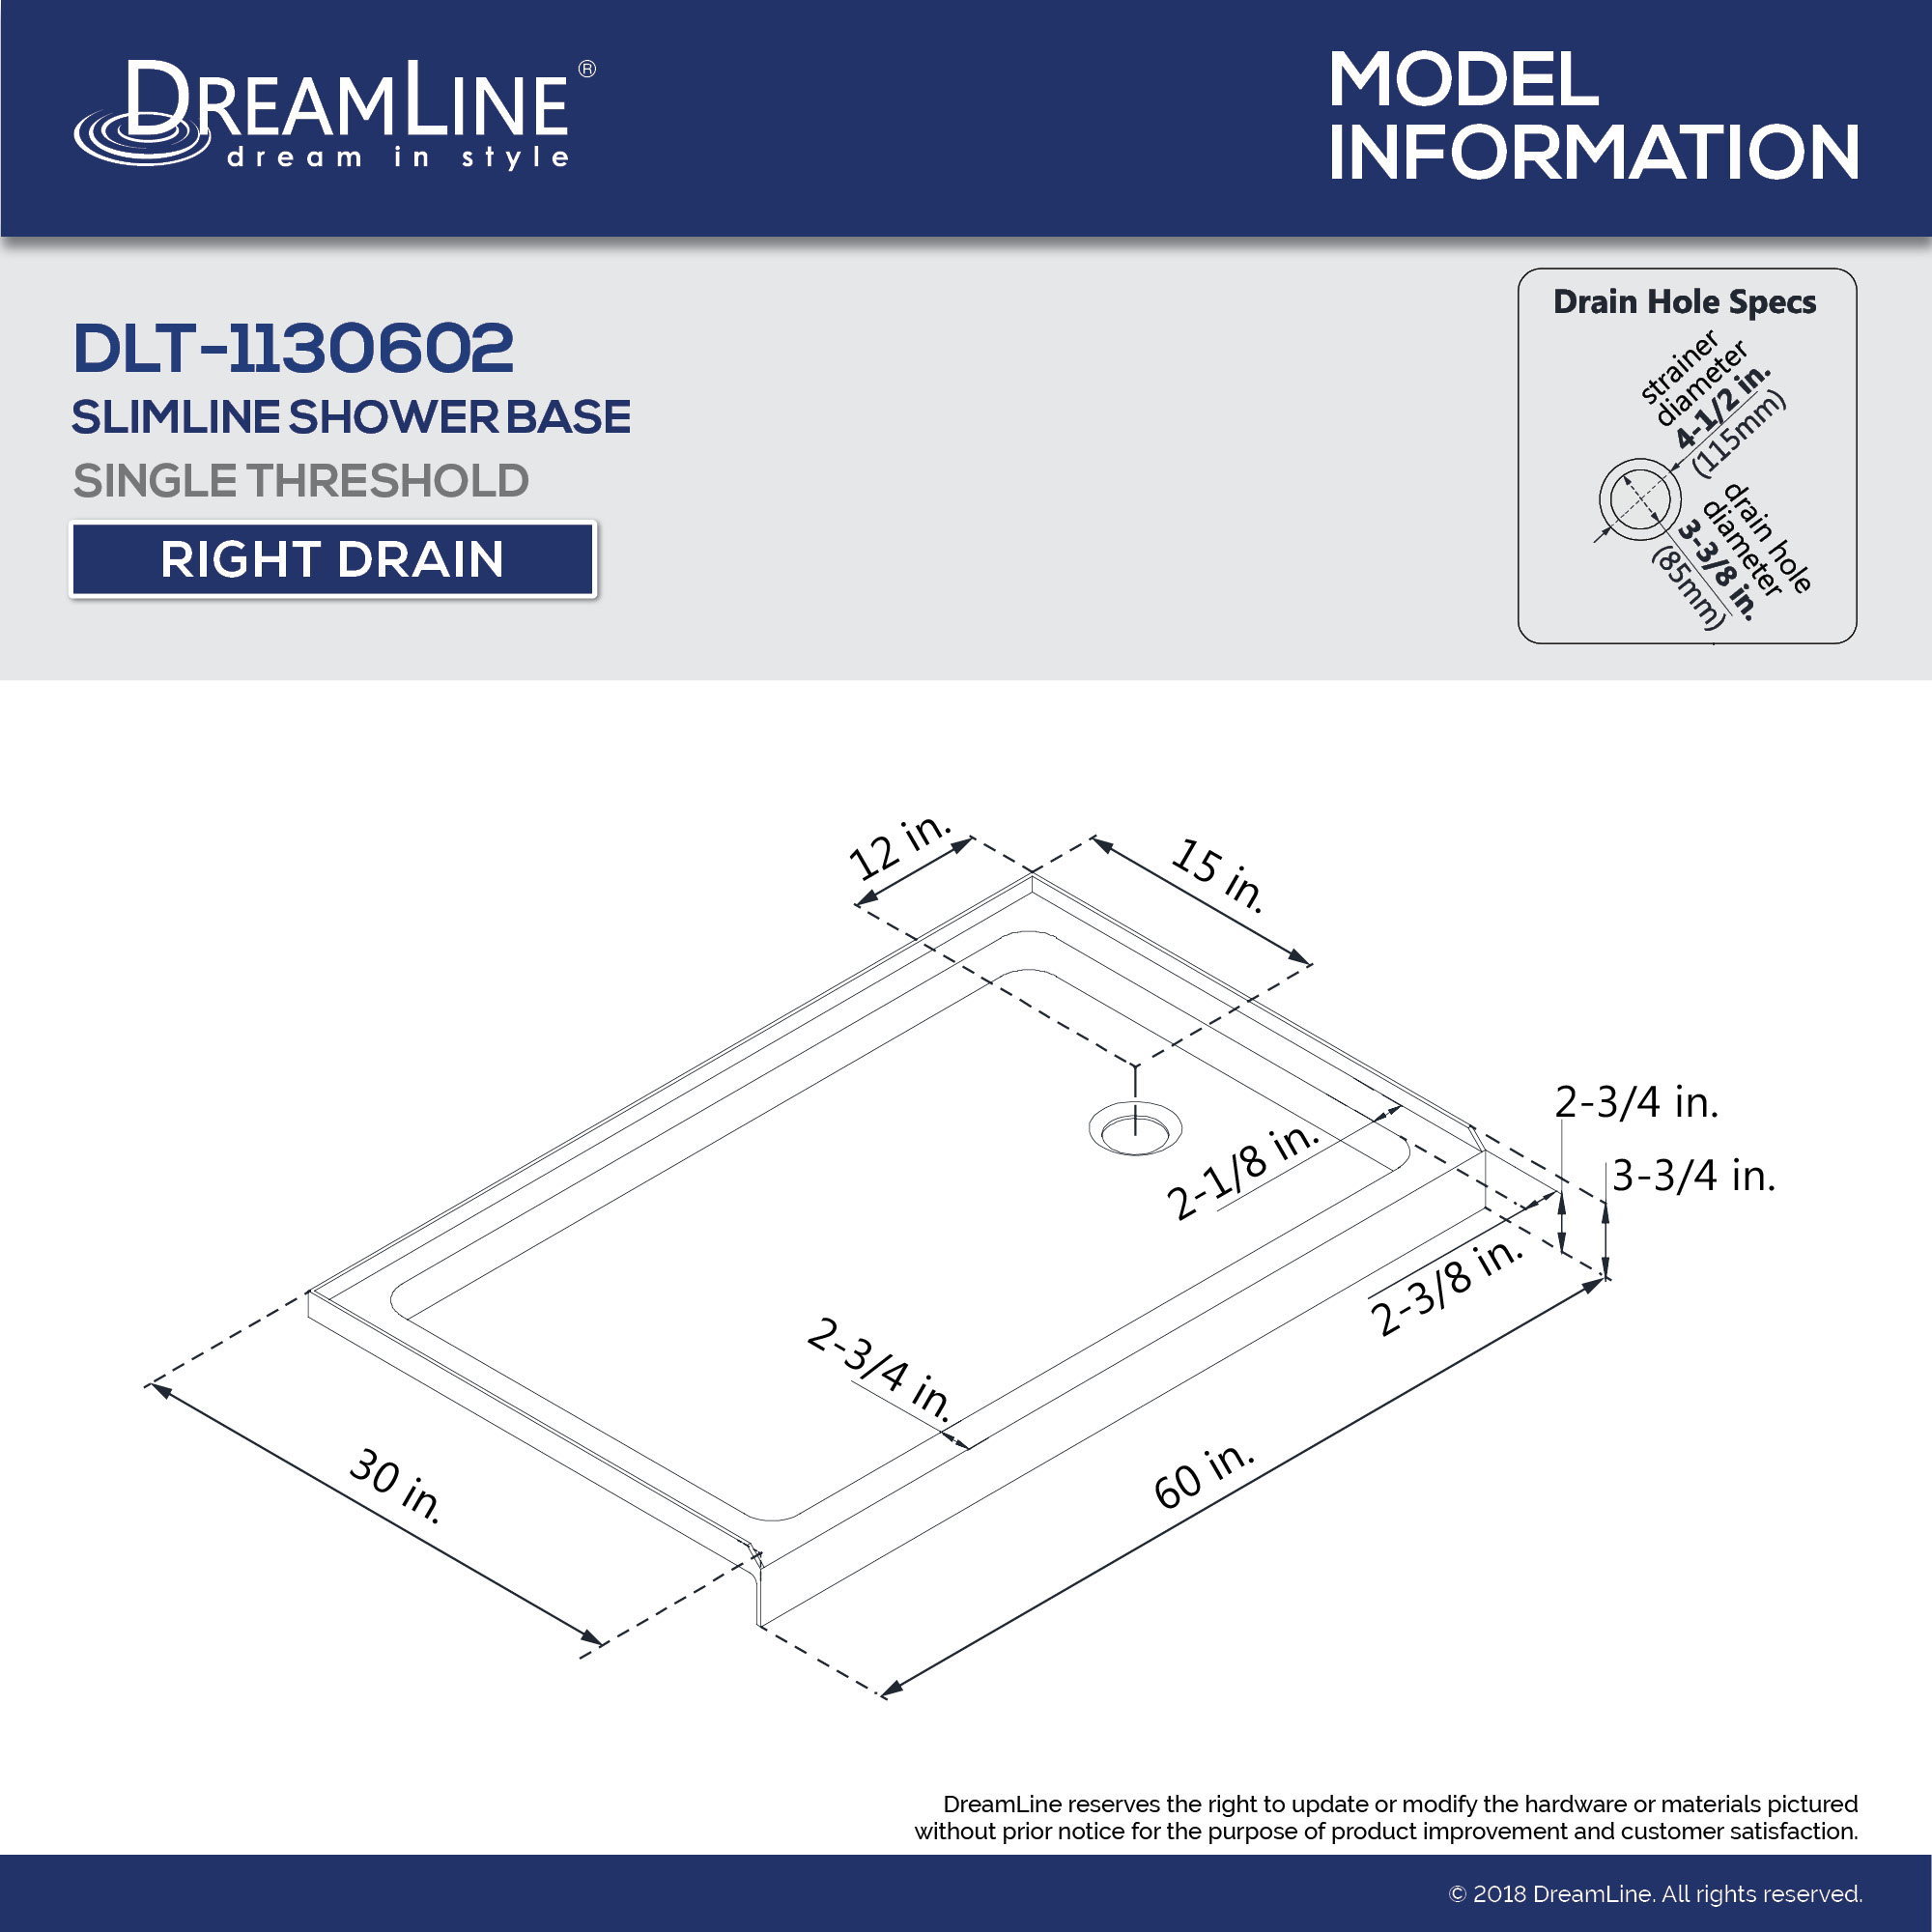 DreamLine Encore 30 in. D x 60 in. W x 78 3/4 in. H Bypass Shower Door in Chrome and Right Drain White Base Kit